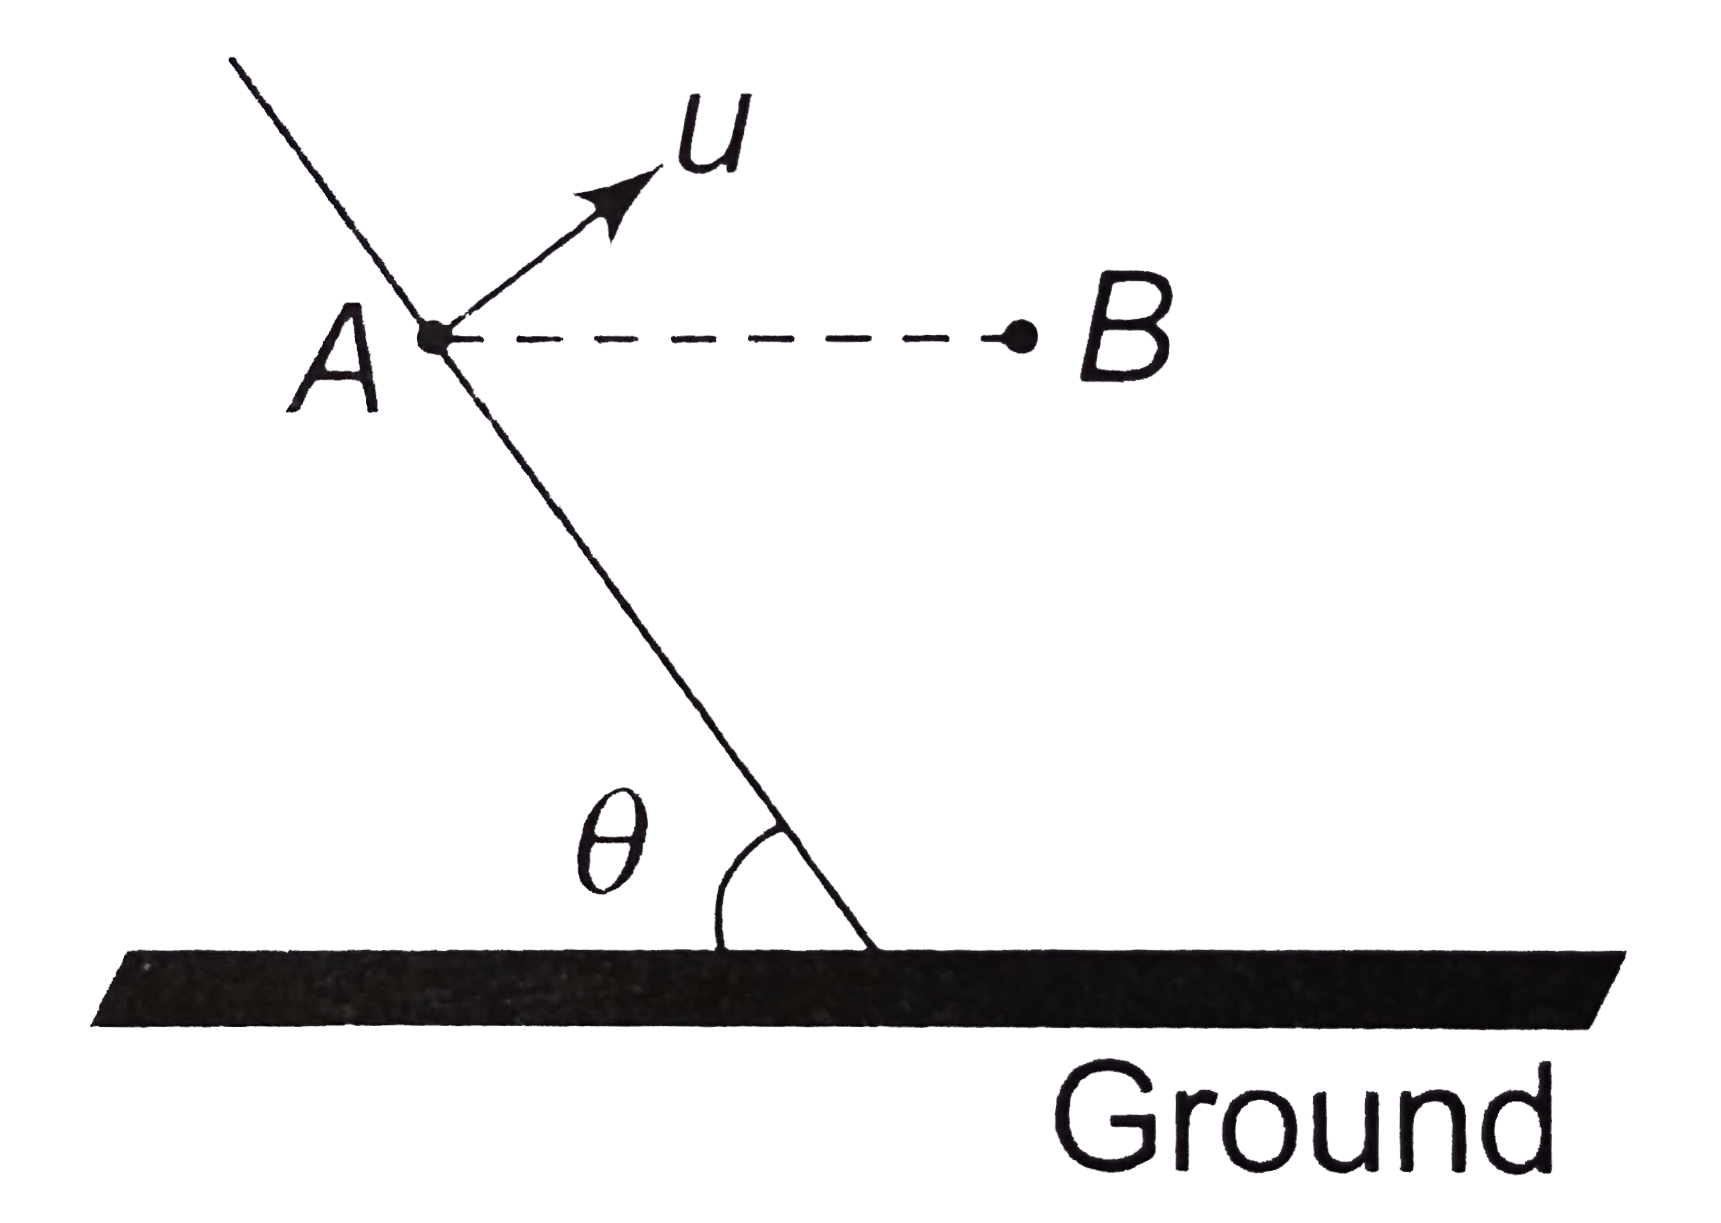 A particle is projected at point A from an inclination plane with inclination angle theta as shown in figure. The magnitude of projection velocity is vecu and its direction is perpendicular to the plane. After some time it passes from point B which is in the same horizontal level of A, with velocity vecv. Then the angle between vecu and vecv will be